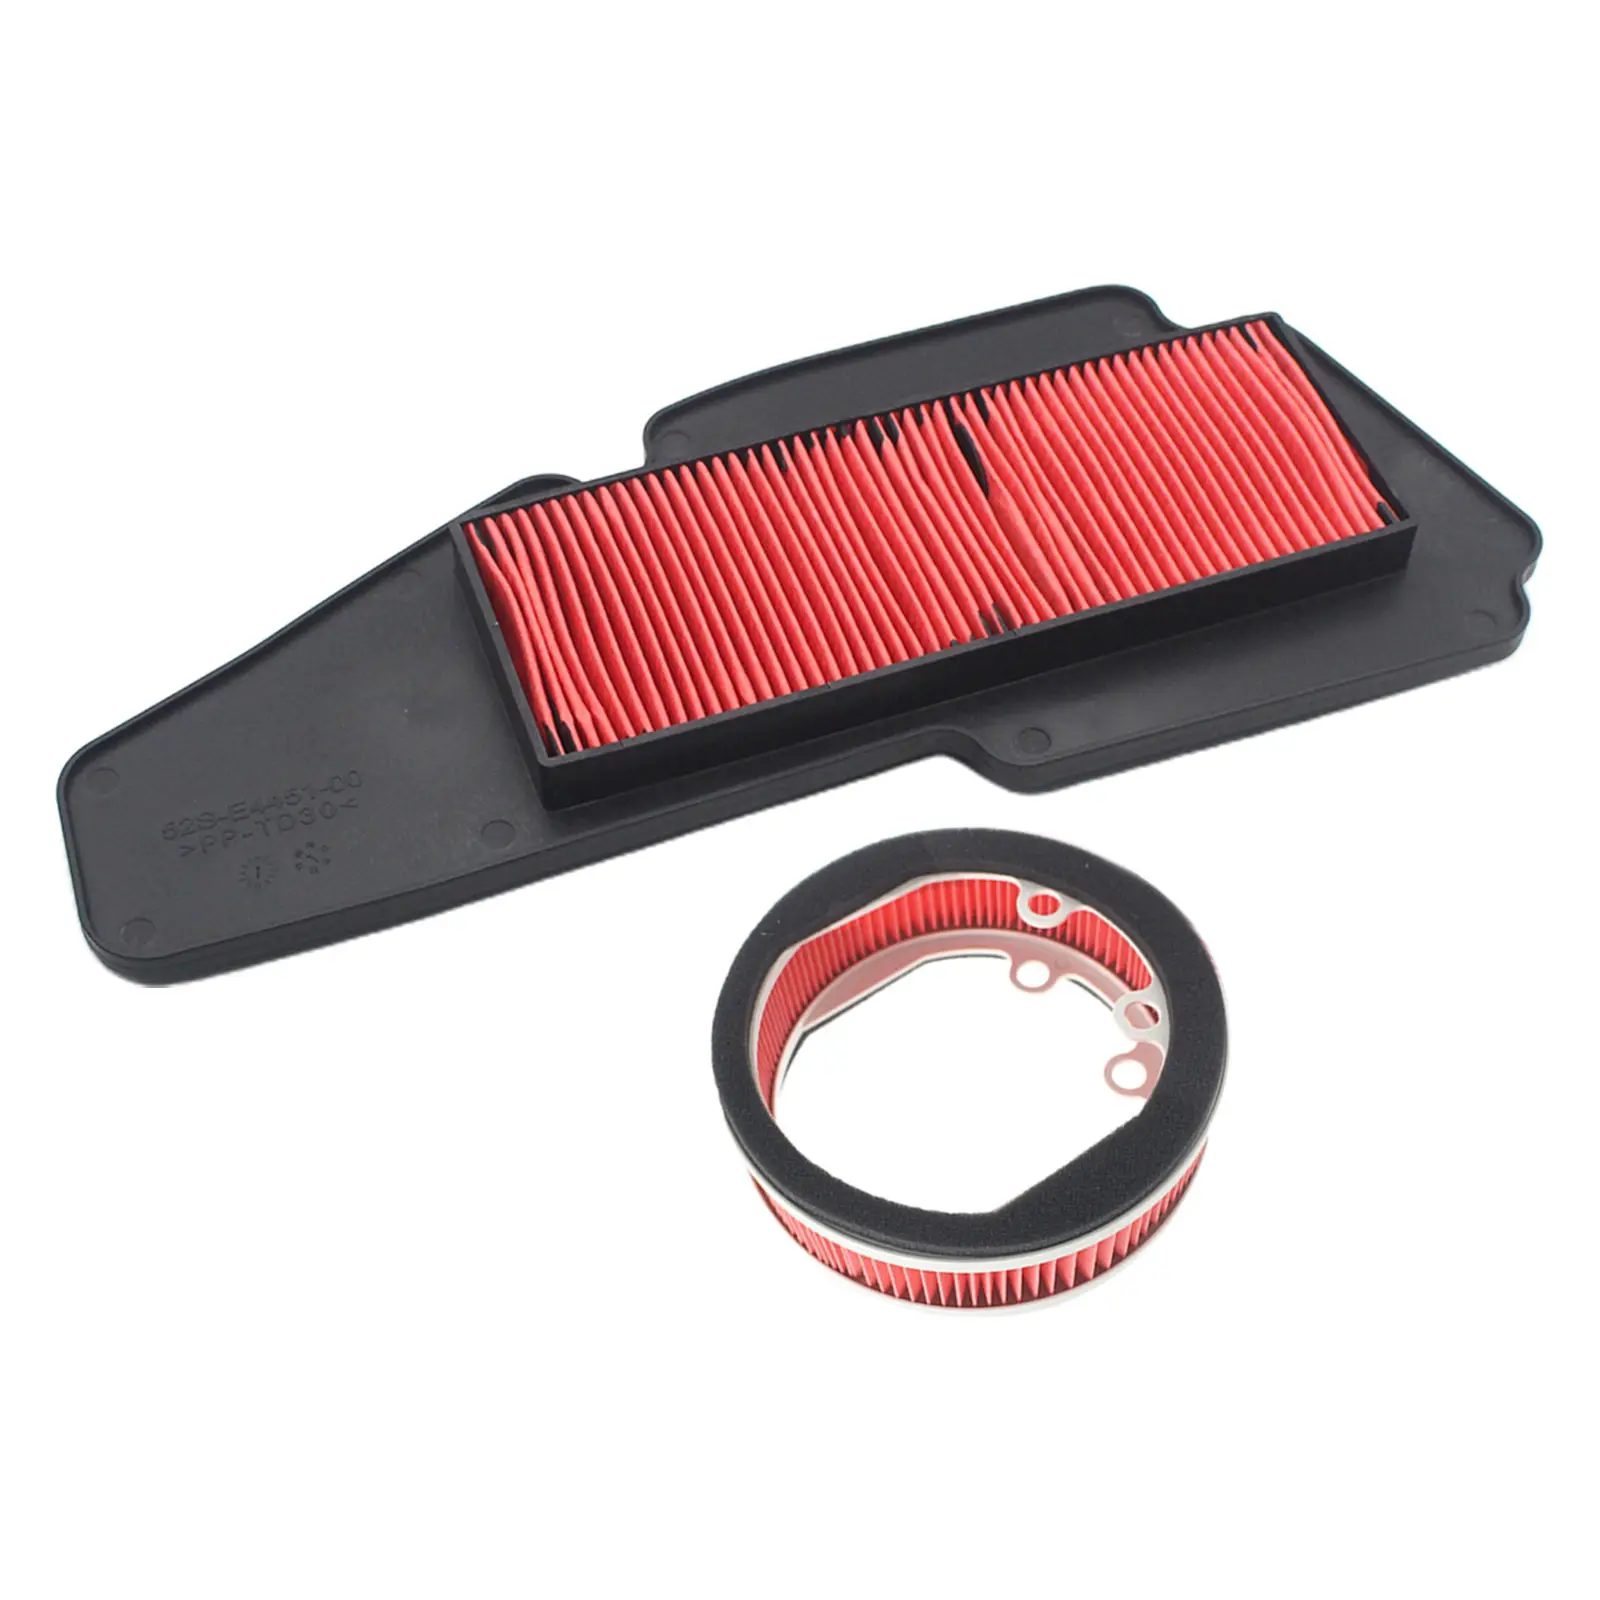 Durable Motocycle Air Filter Repalcements Parts for YAMAHA SMAX155 FORCE155 Repalce Old Parts